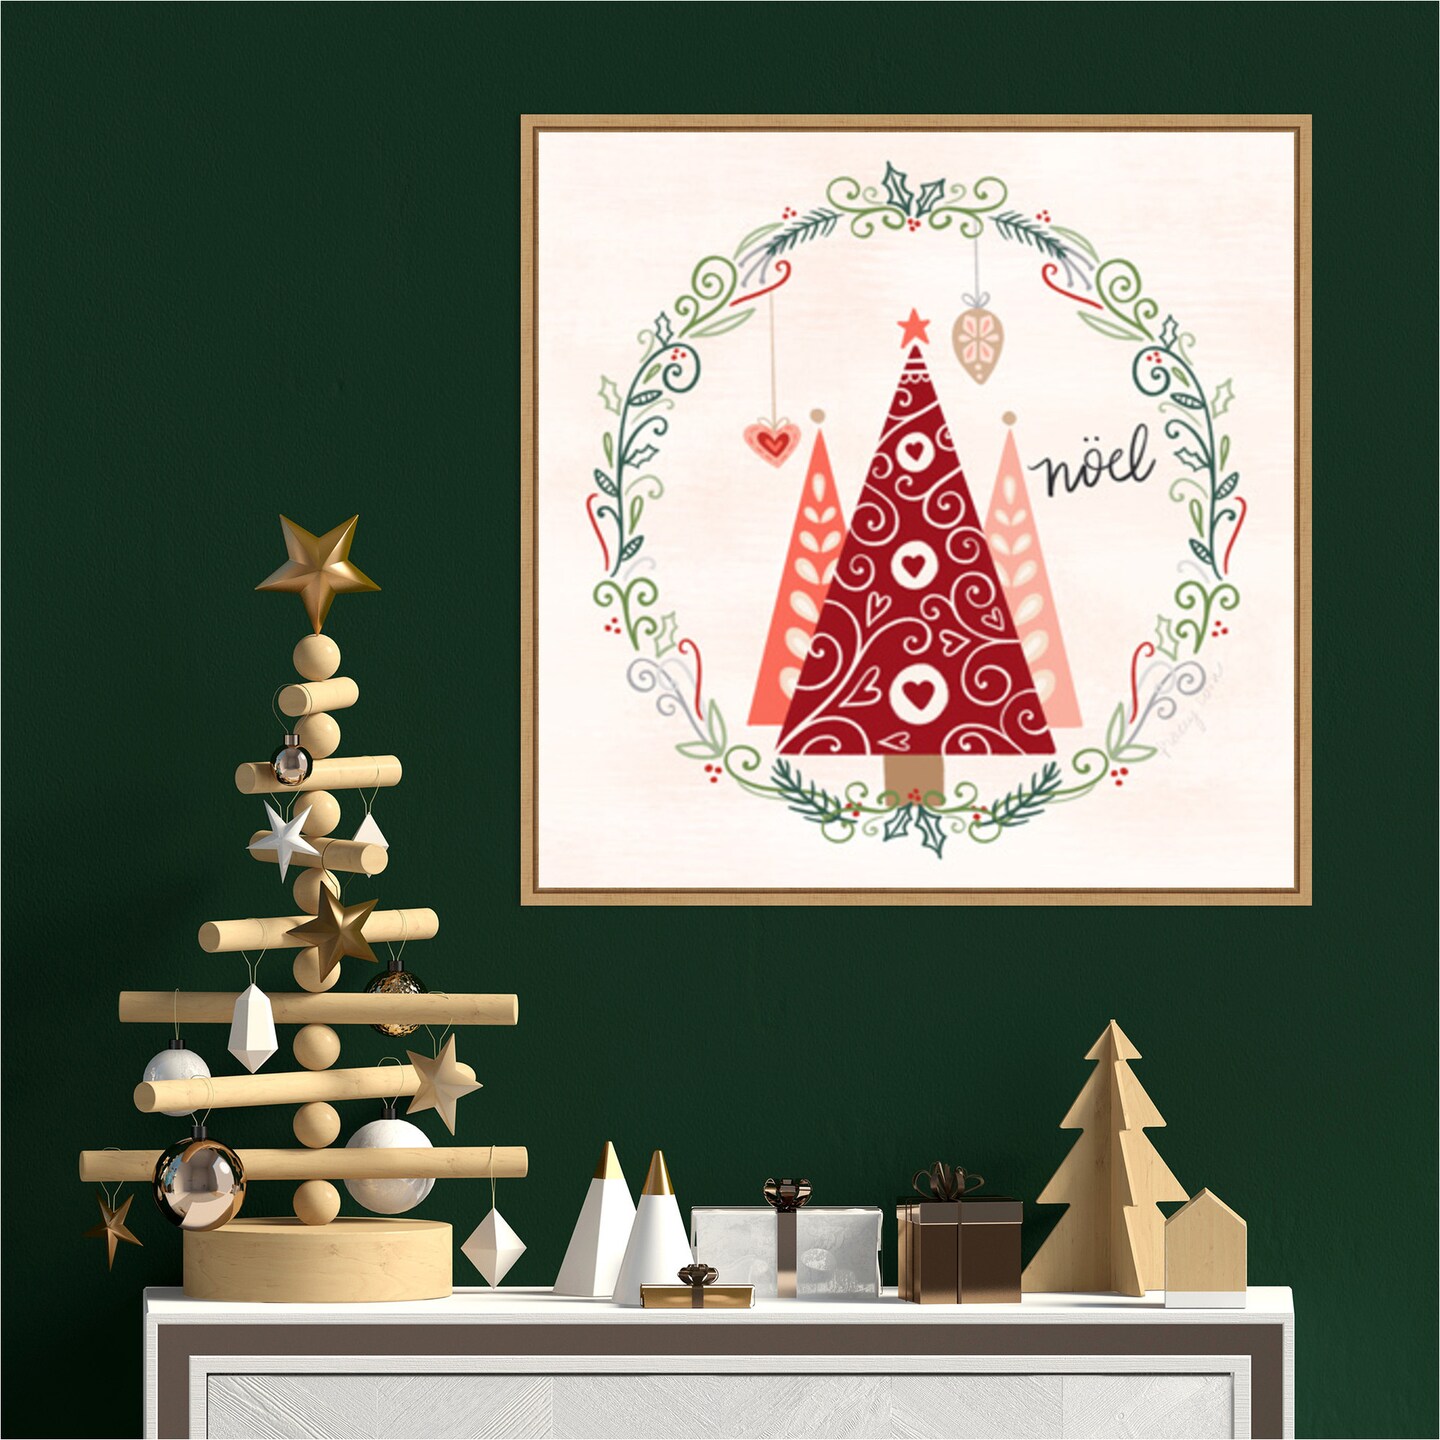 Hygge Christmas III by Noonday Design 22-in. W x 22-in. H. Canvas Wall Art Print Framed in Natural